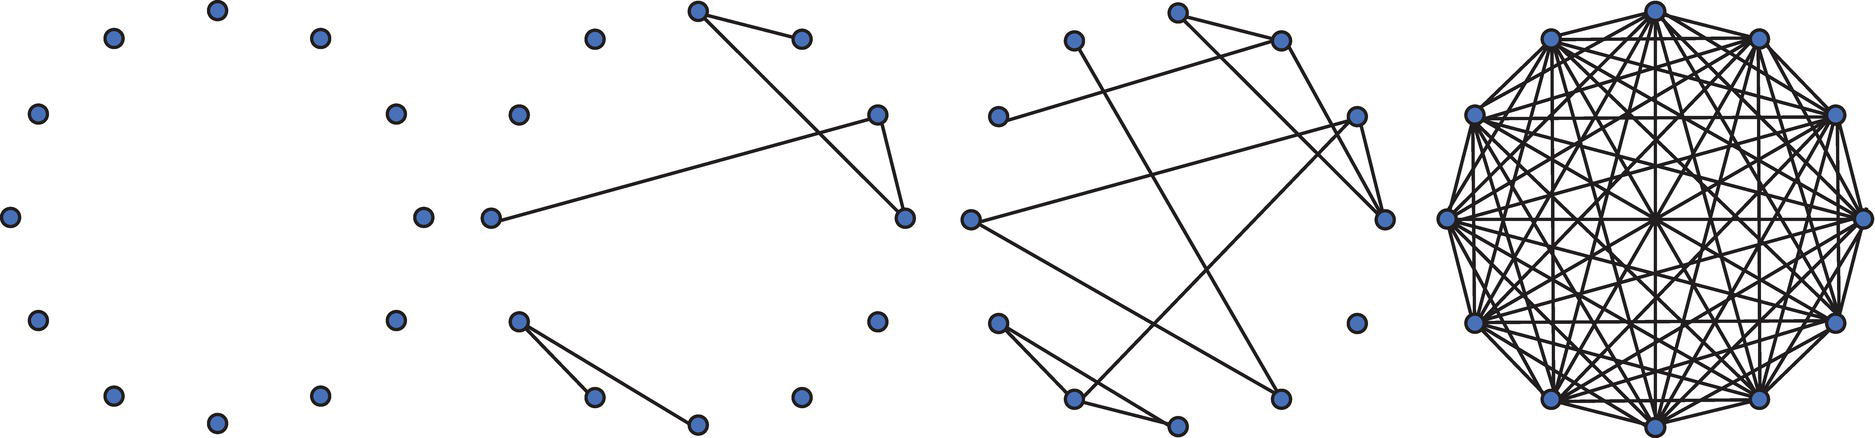 Schematic illustration of four graphs with same number of nodes but different number of links.